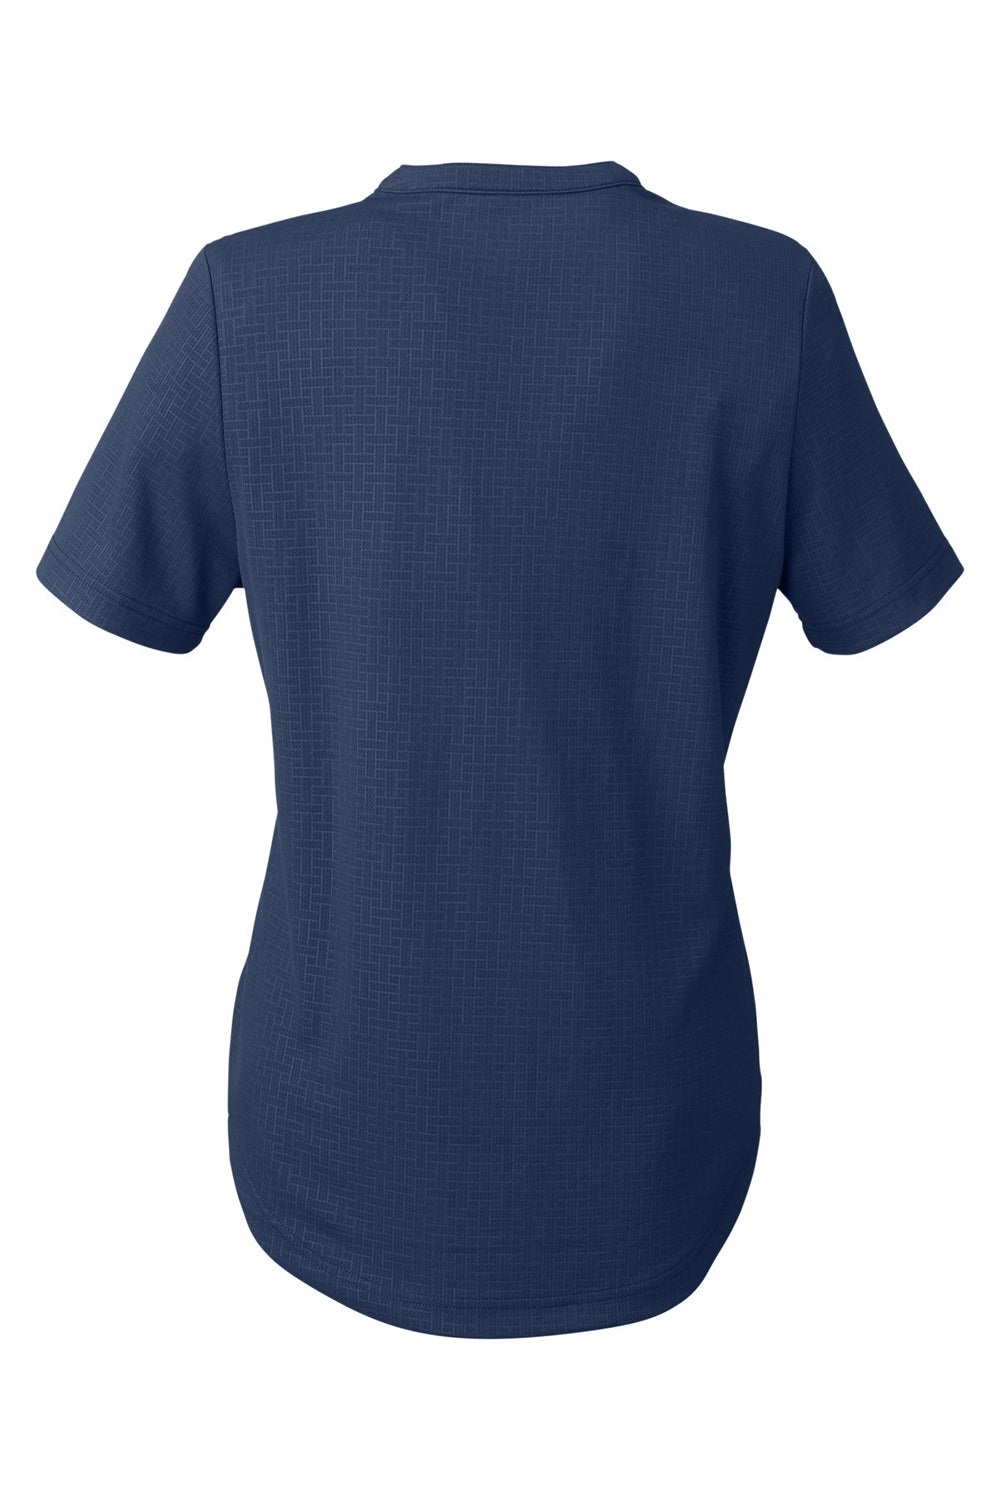 North End NE102W Womens Replay Recycled Short Sleeve Polo Shirt Classic Navy Blue Flat Back